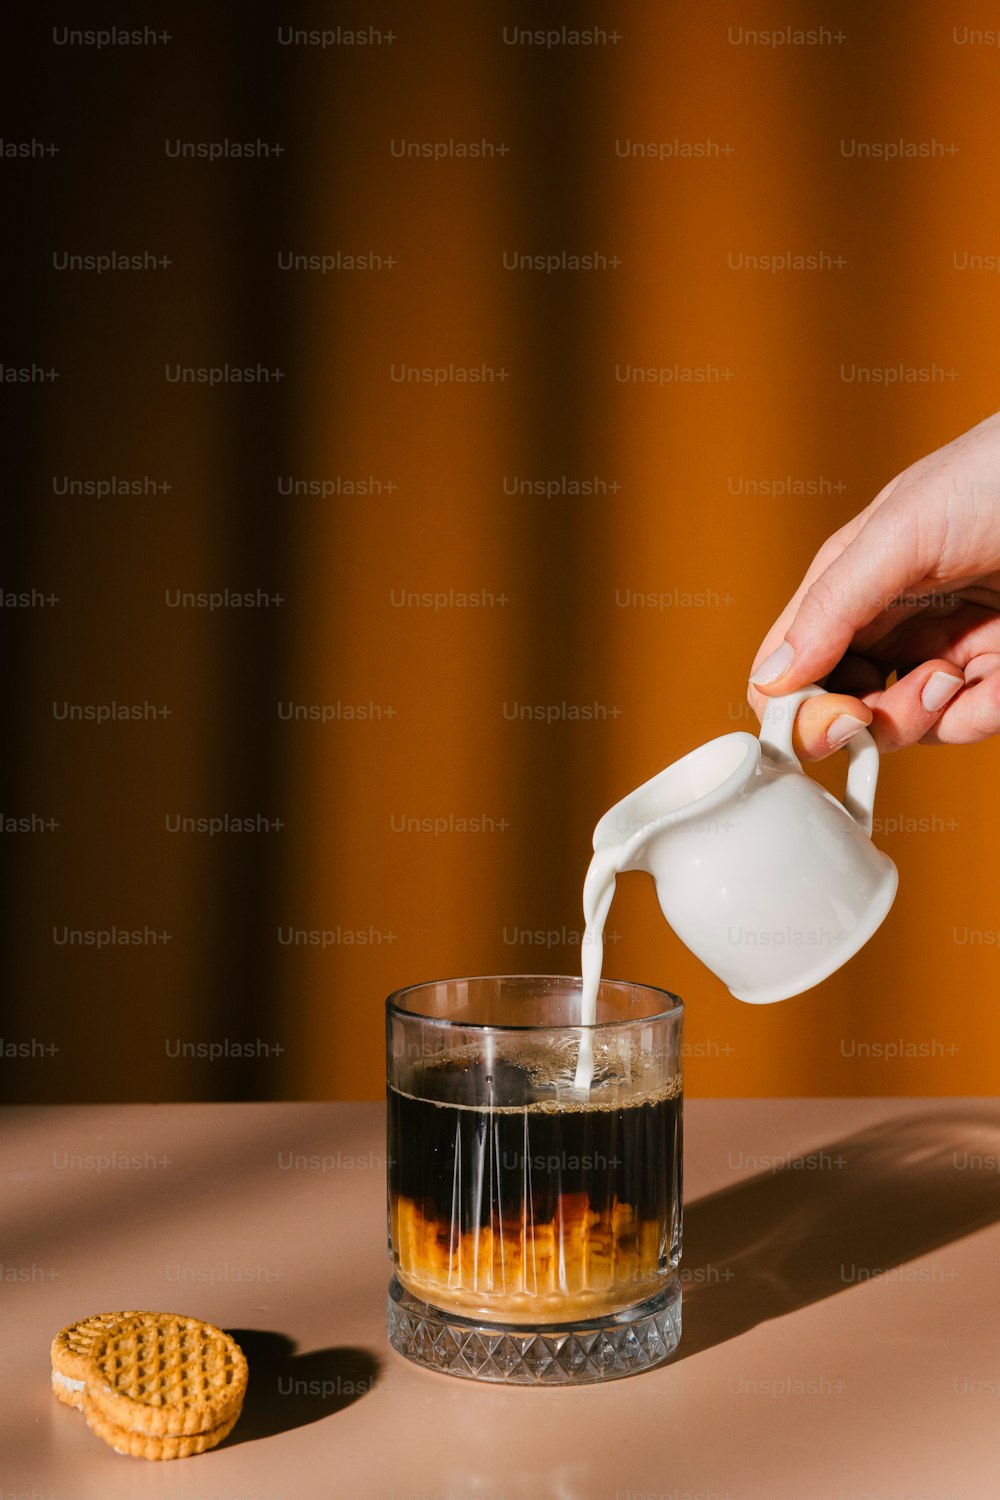 a person pouring a drink into a glass